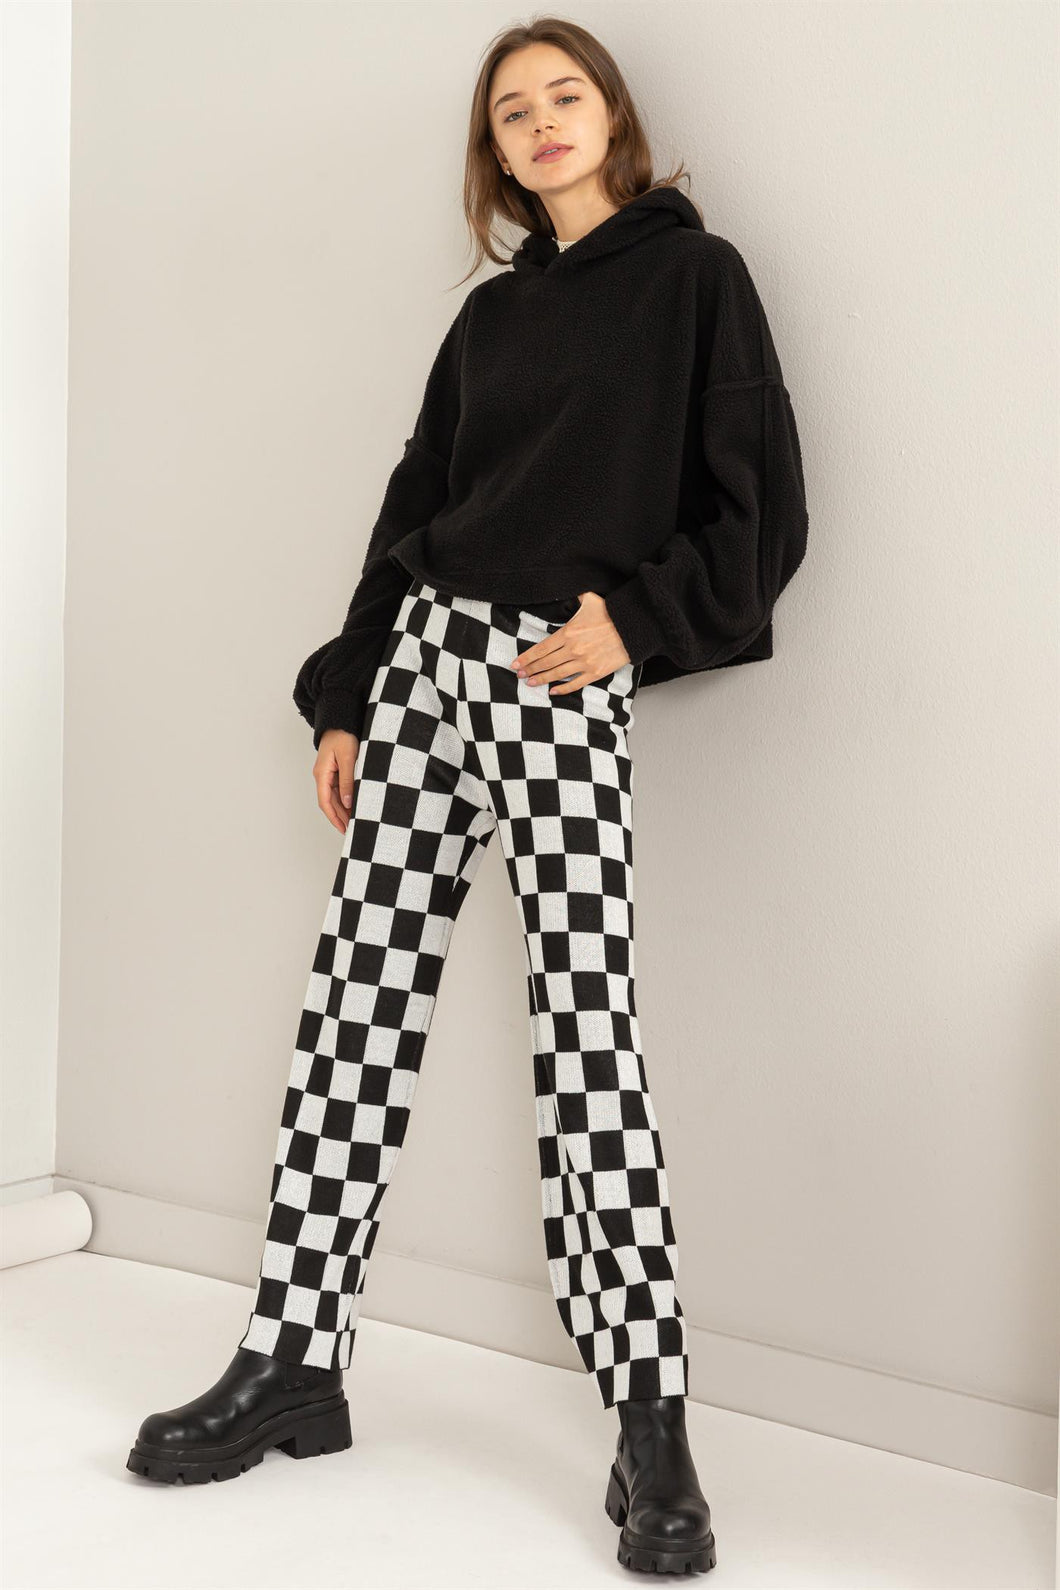 Checkered Pants (More Colors Available)